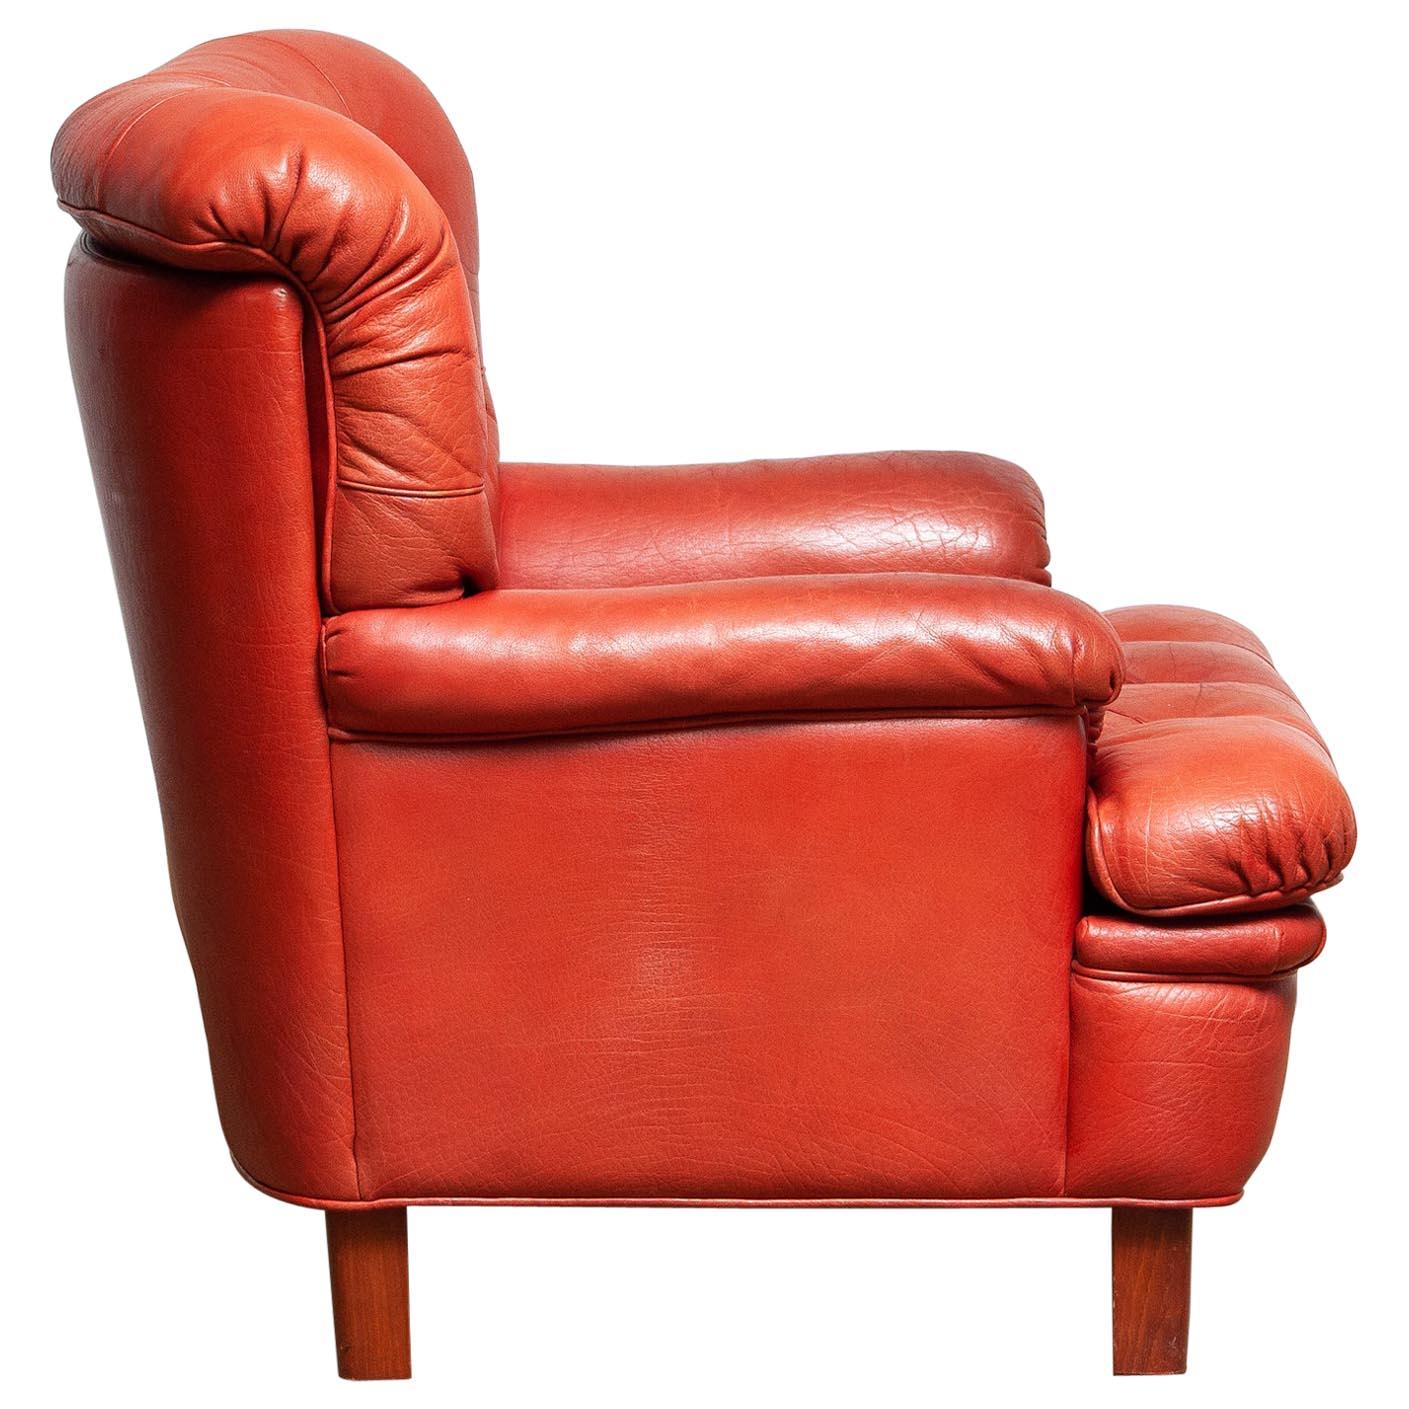 Extremely beautiful 1960s buffalo leather and quilted rare easy or lounge or armchair designed by Arne Norell for AB Norell in Solna in Sweden. This chair is very comfortable and the overall condition is good.